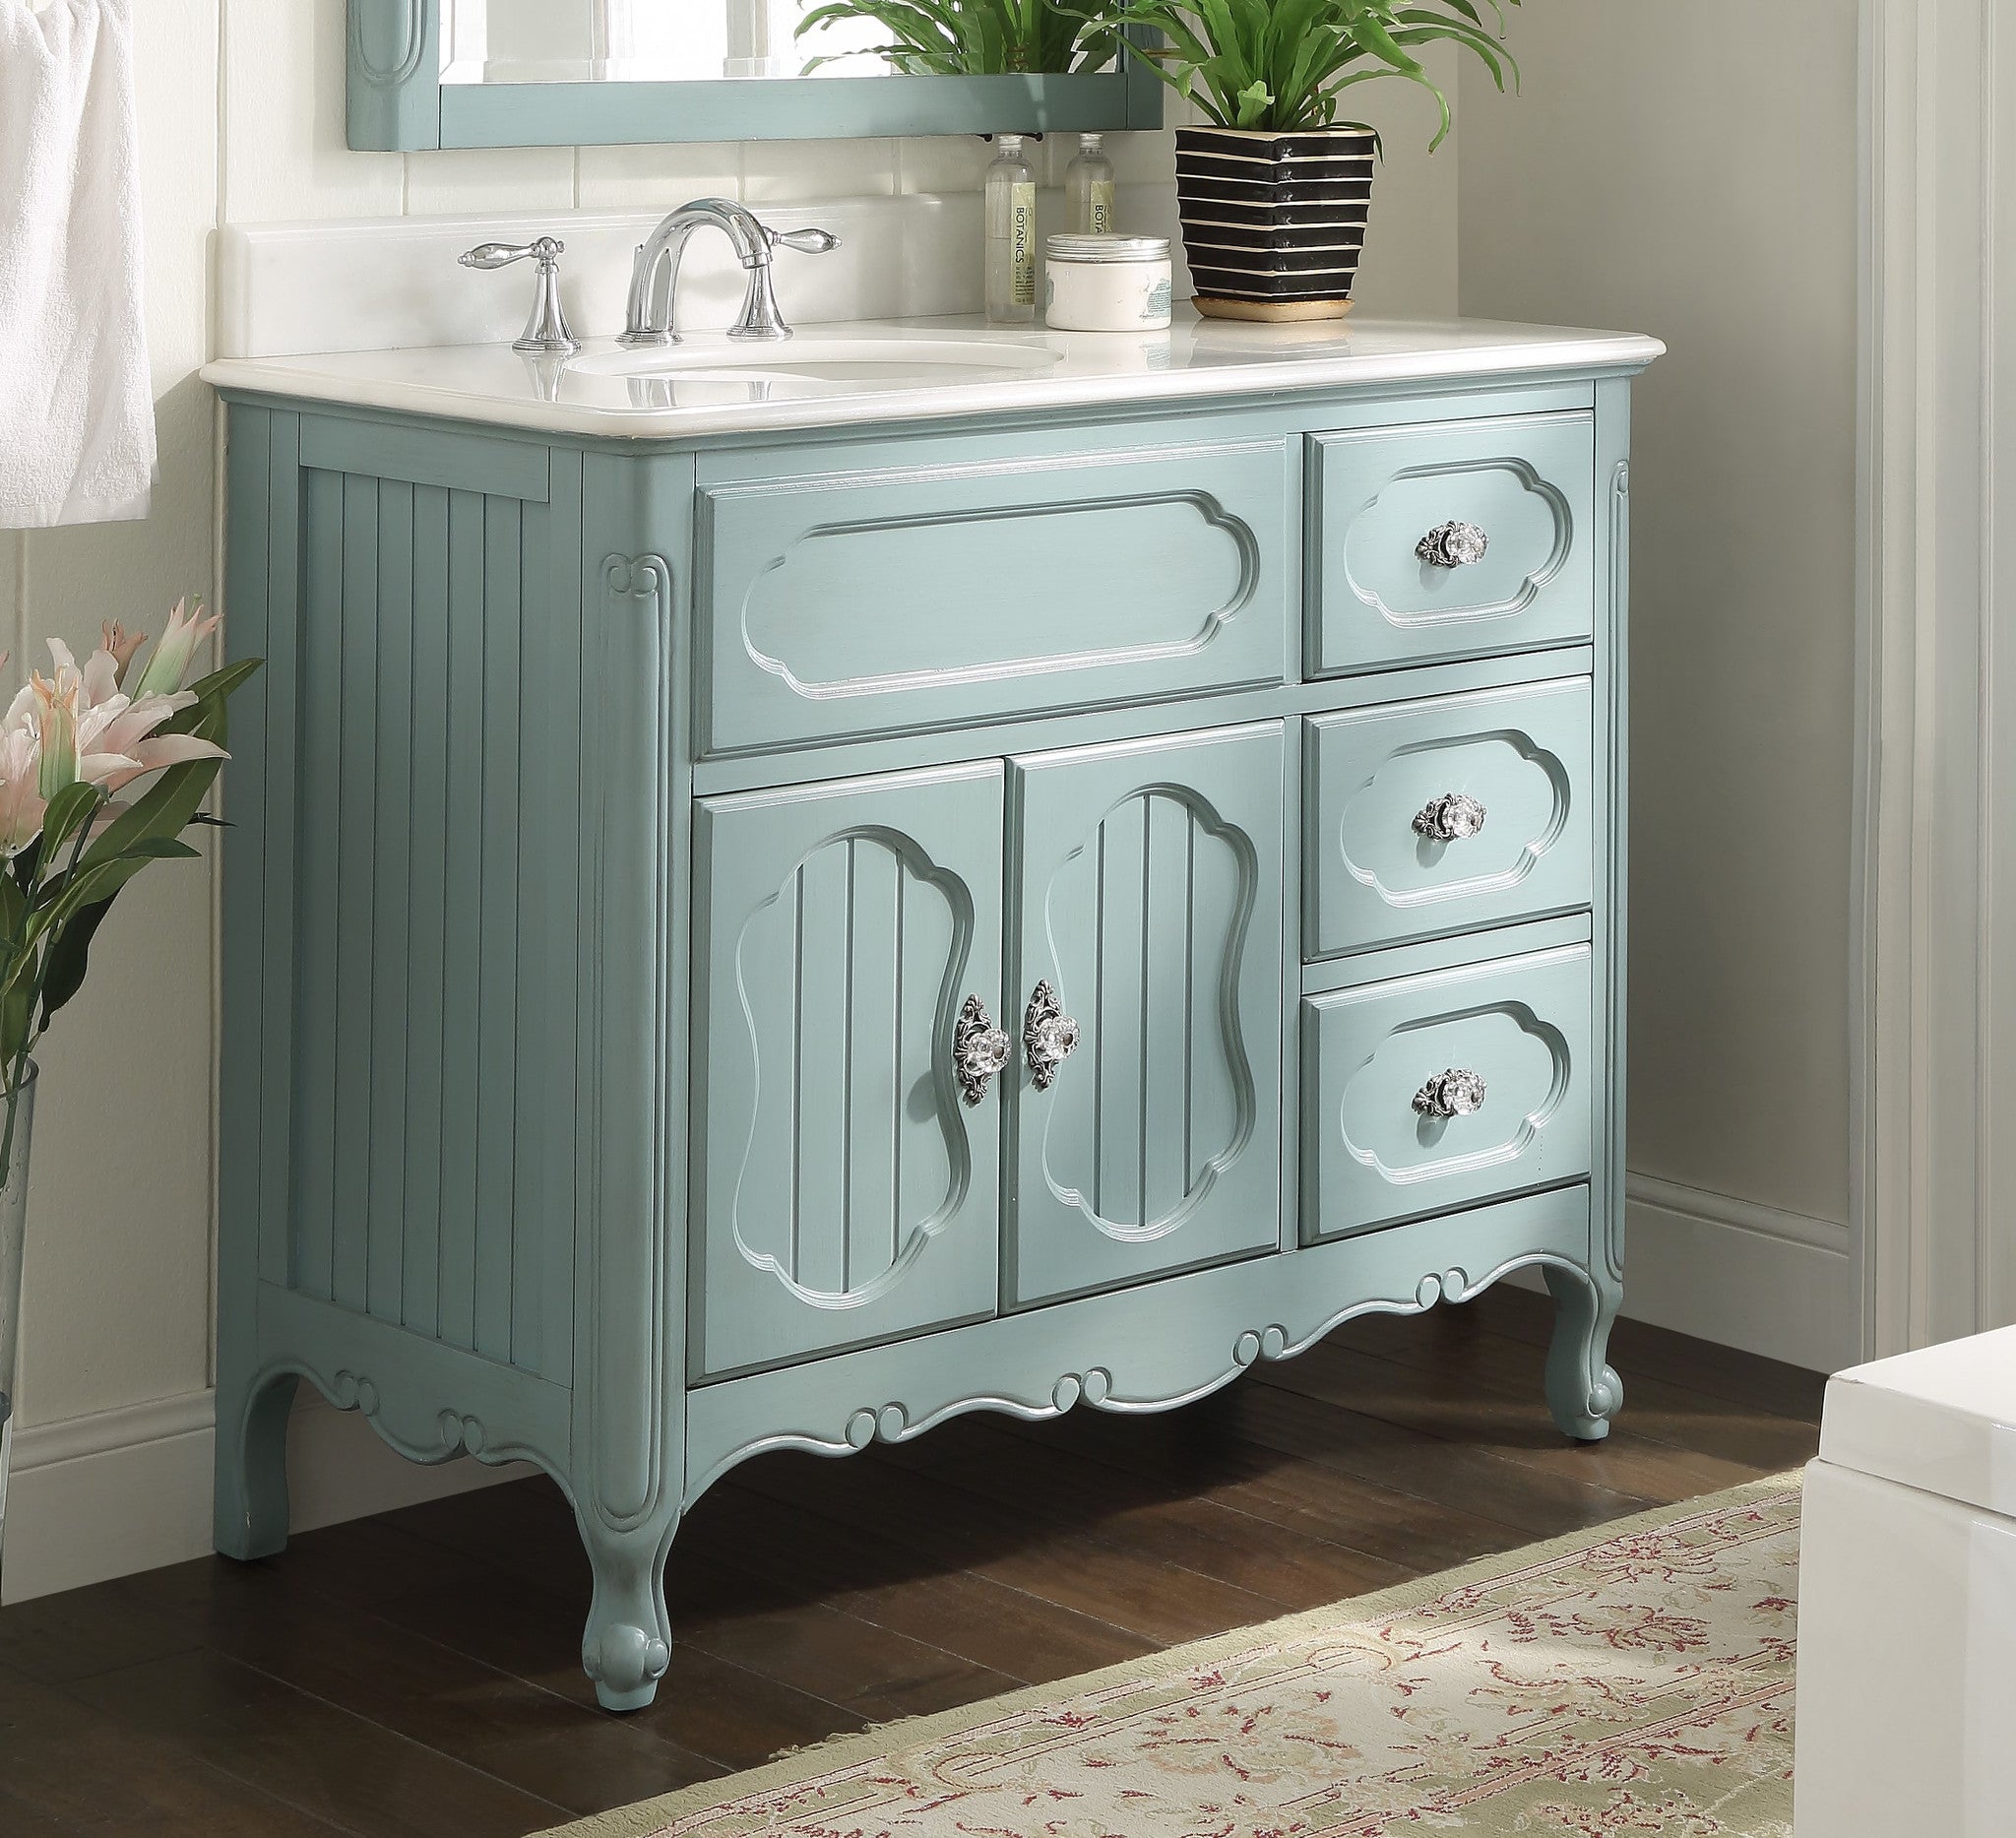 42 Benton Collection Victorian Cottage Style Knoxville Bathroom Sink Vanity Model Gd 1509lb 42